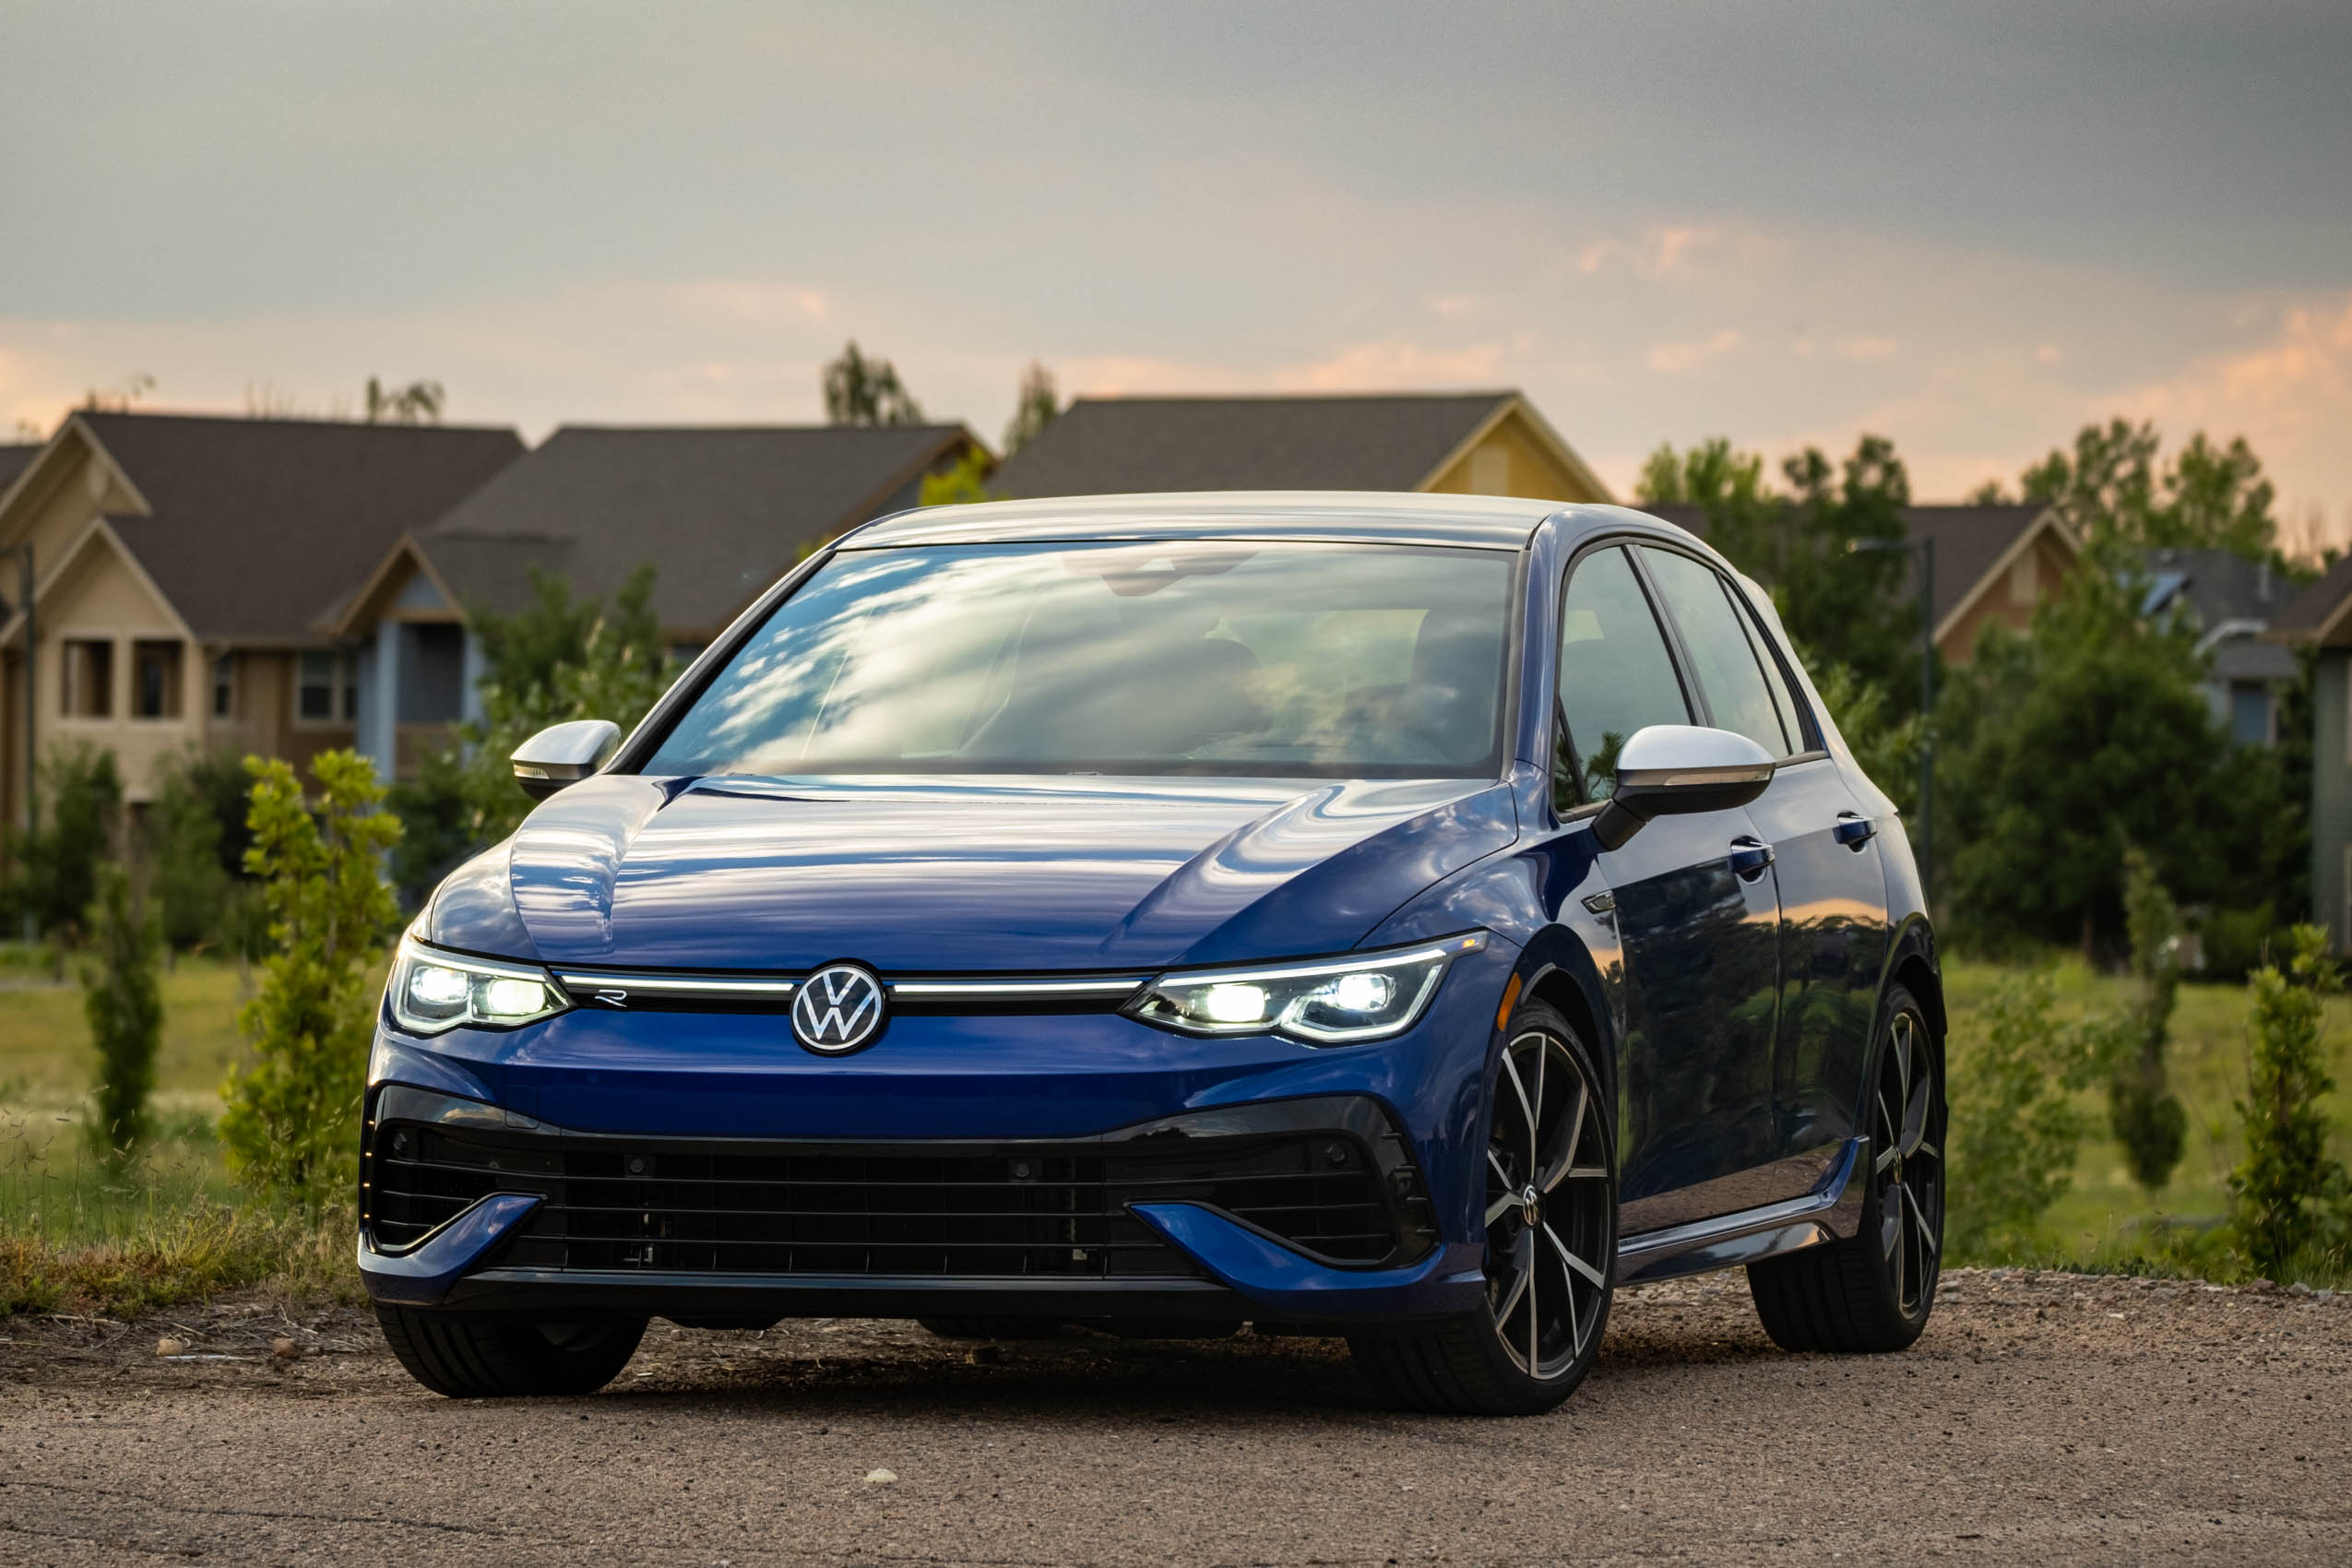 2022 VW Golf R Review: Confronting the Lies of My Youth